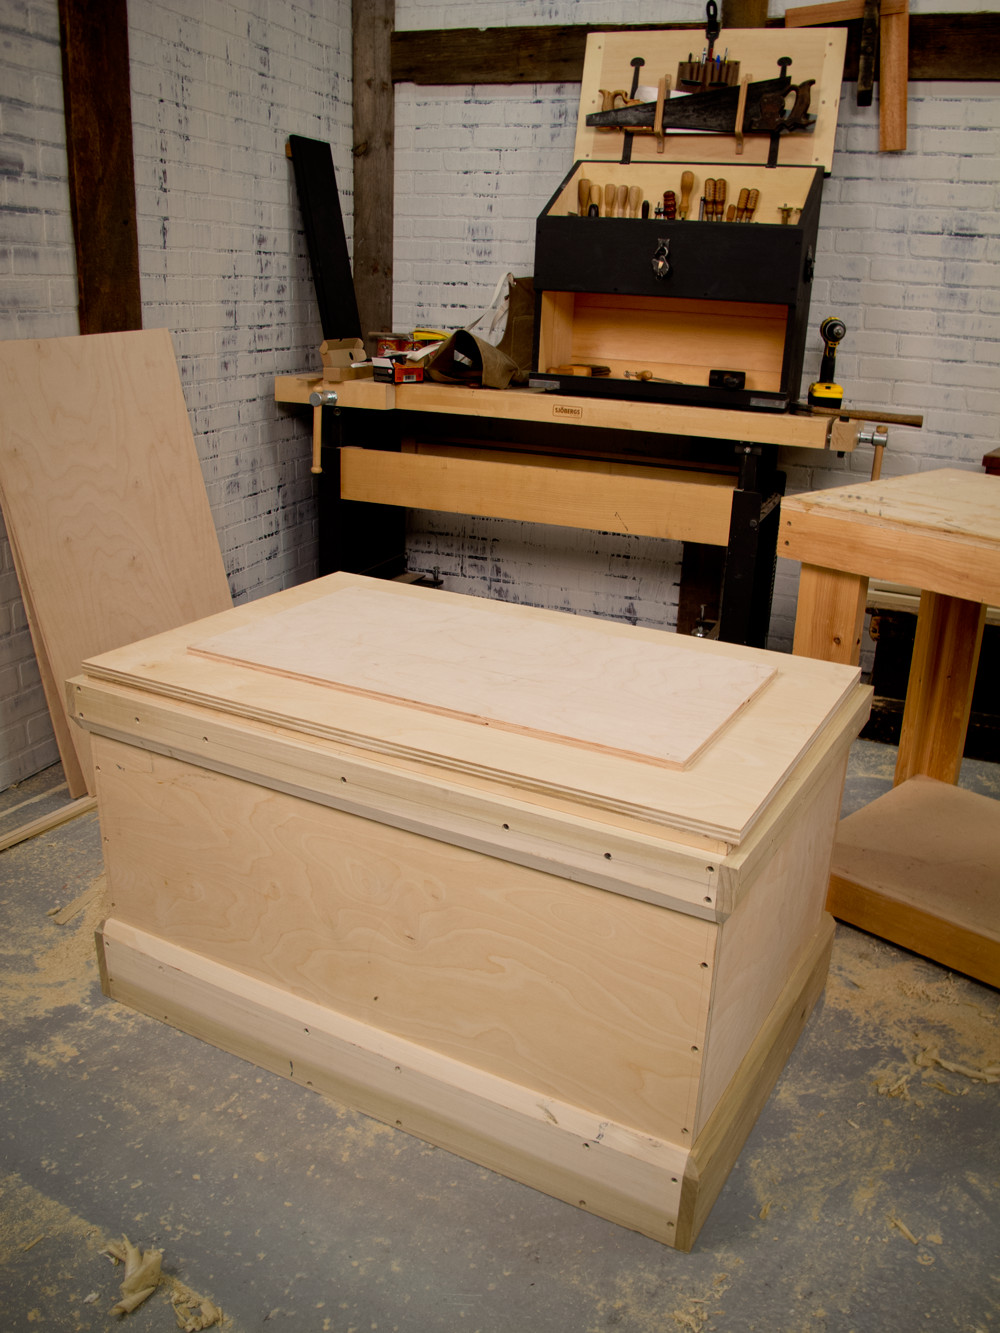 DIY Wooden Tool Chest
 Christopher Schwarz Builds a DIY Tool Chest in 16 Hours